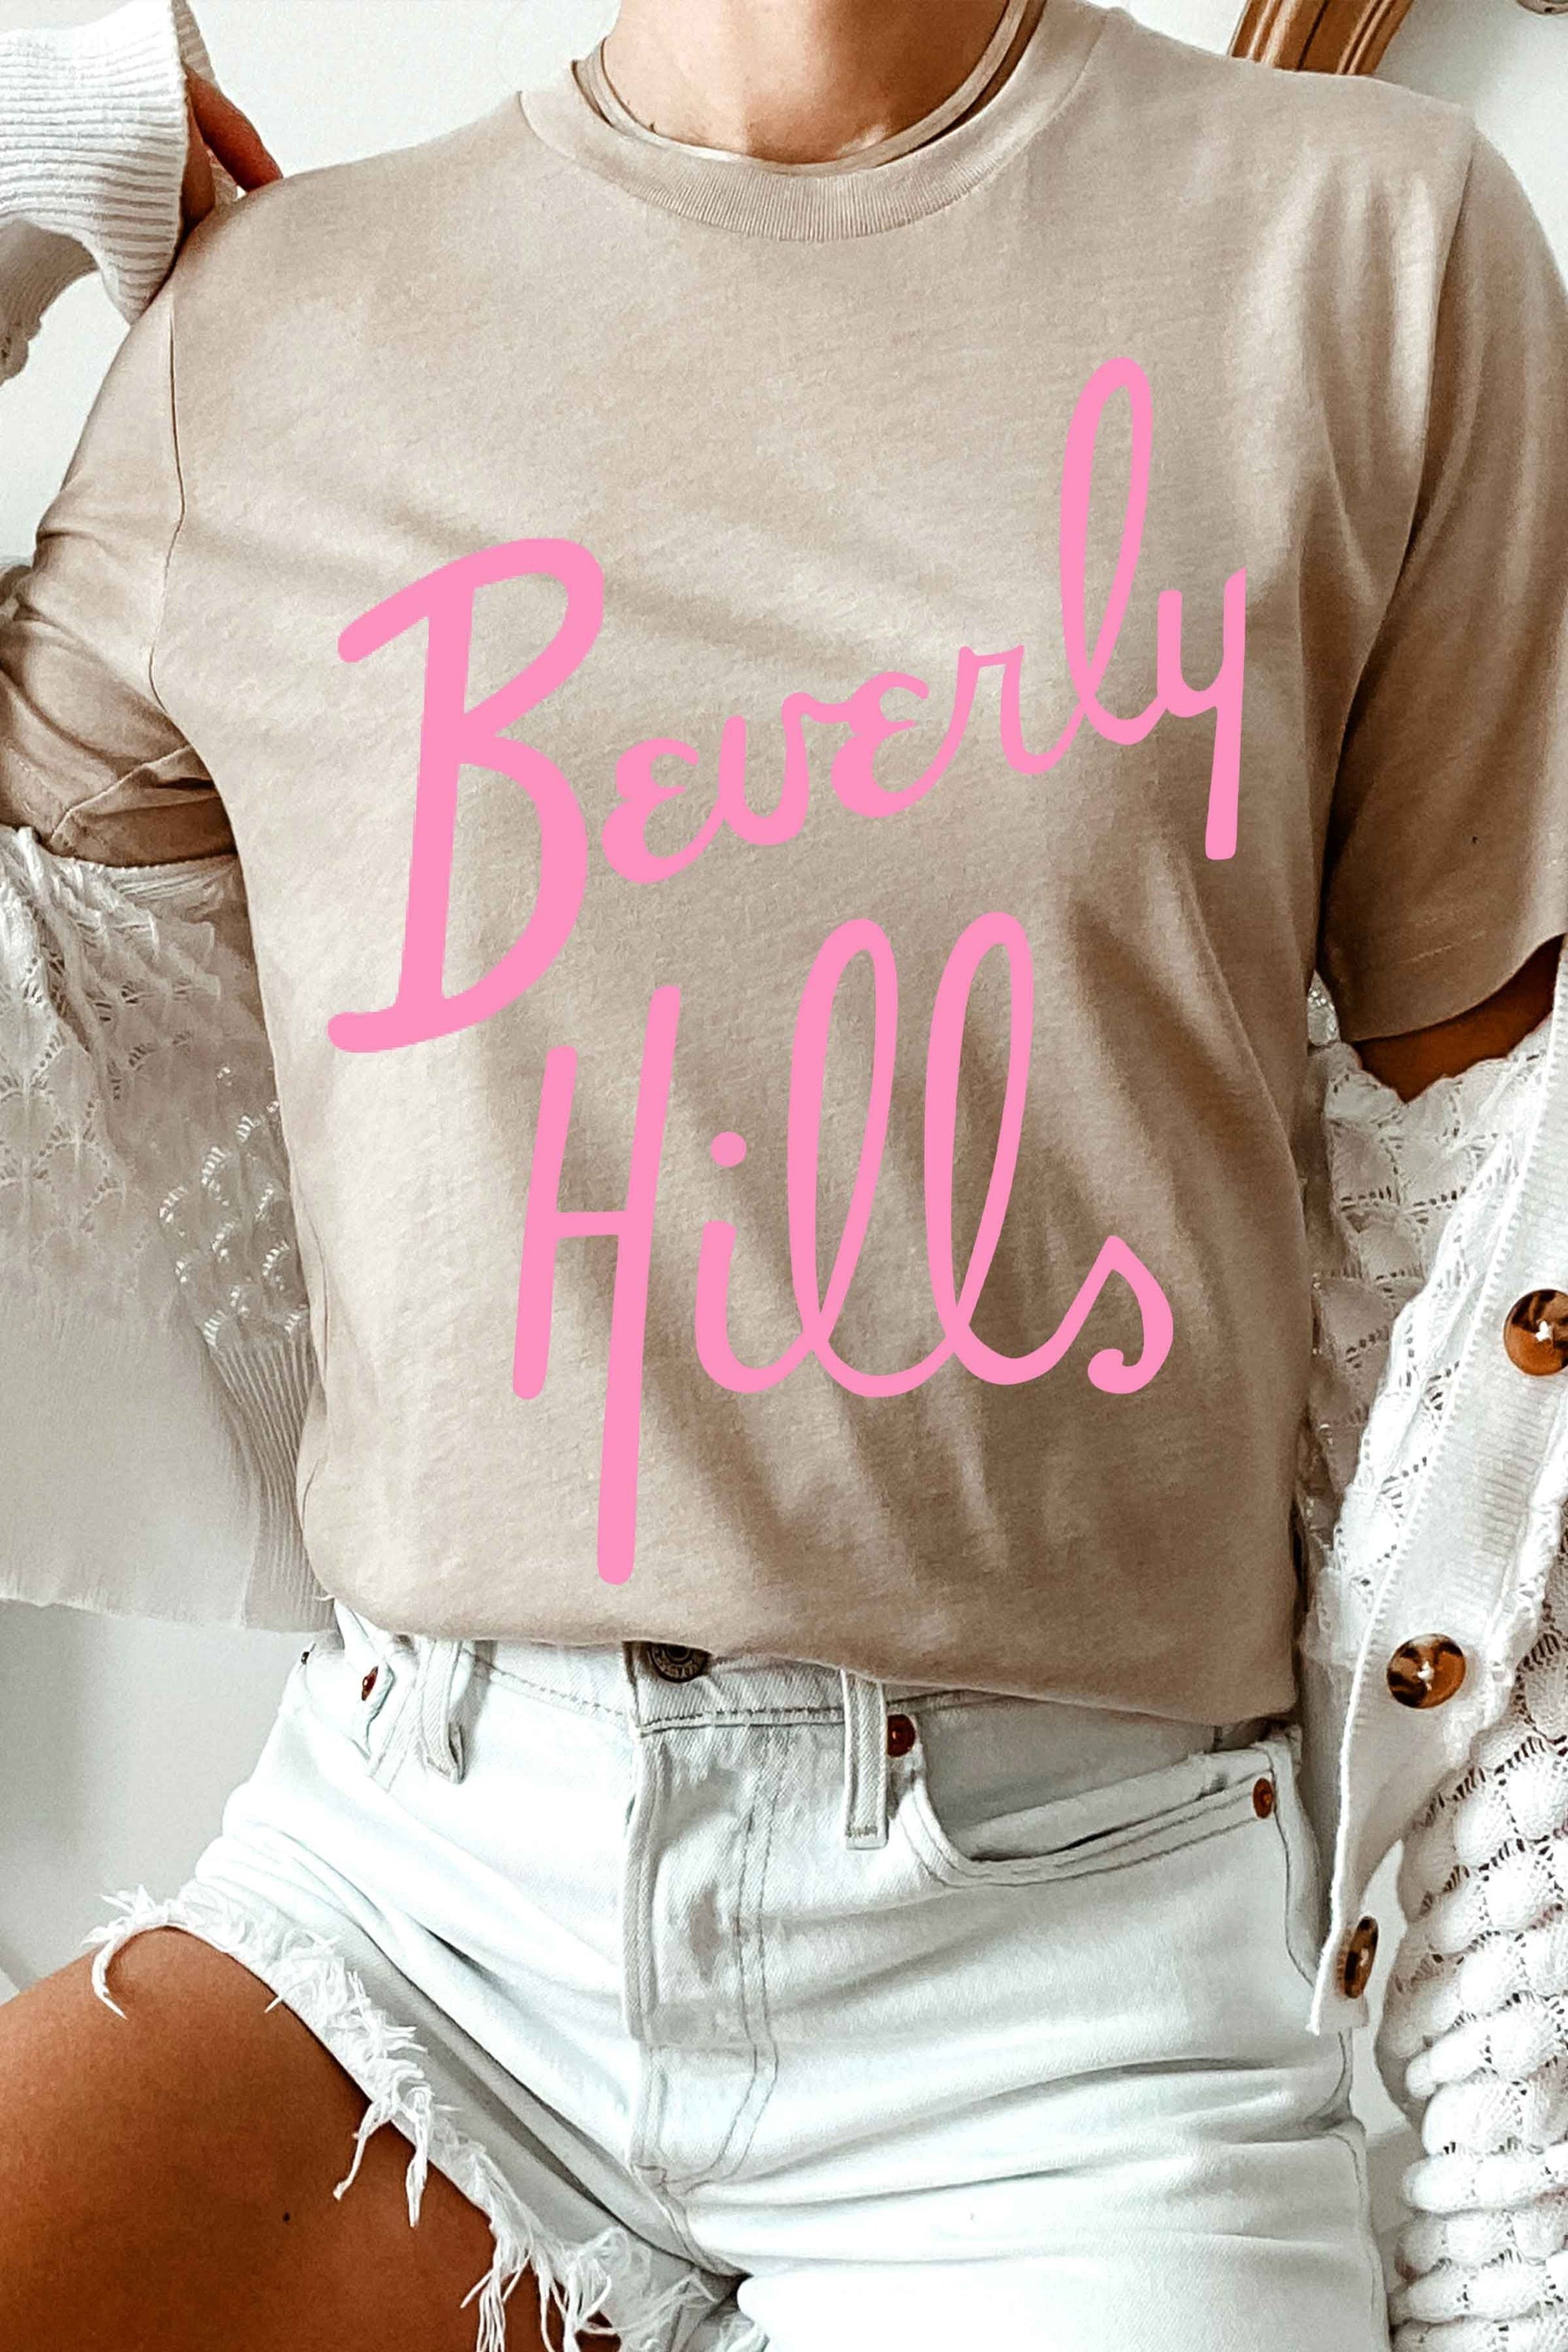 a. Blush Women's Tee Beverly Hills Graphic Tee || David's Clothing